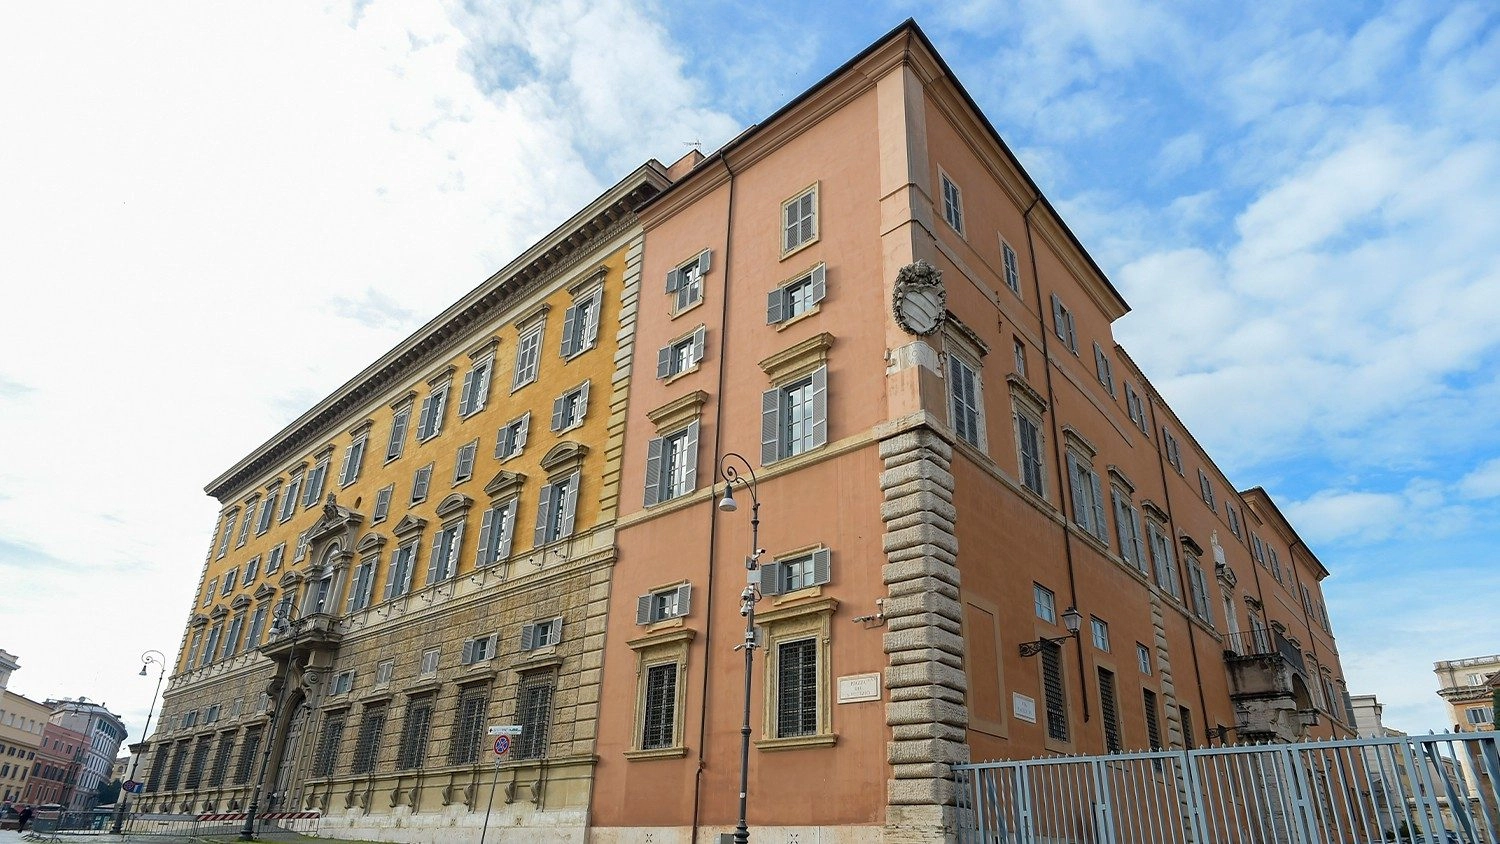 The Palazzo del Sant'Uffizio in Rome is the home of the Vatican's Dicastery for the Doctrine of the Faith